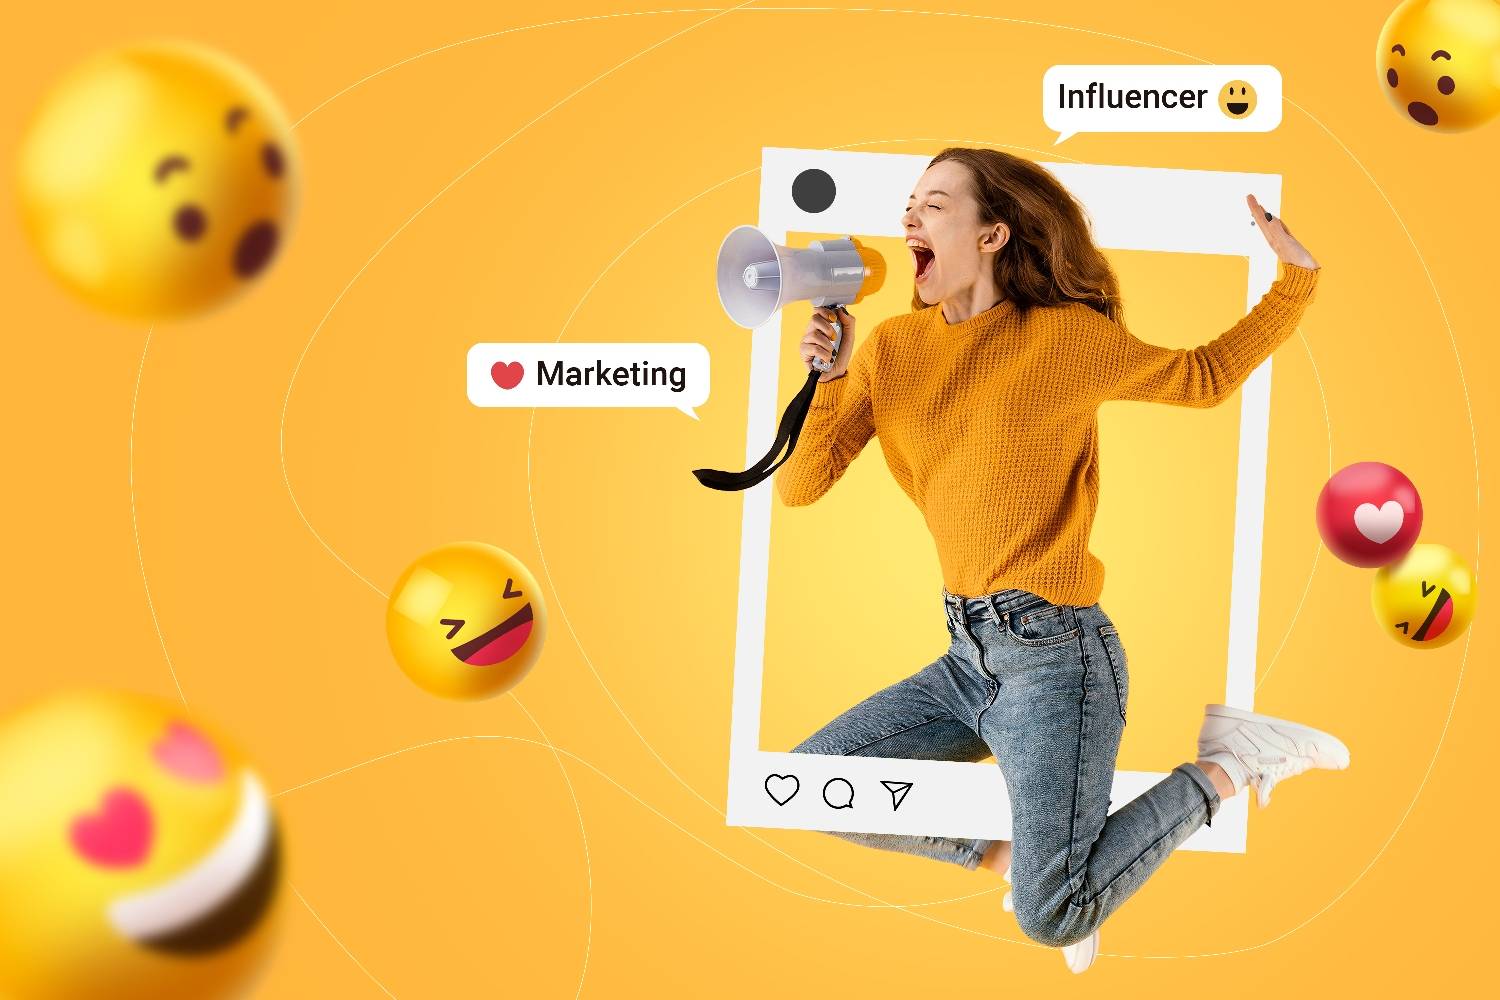 10 Types of Influencer Marketing Campaigns for Businesses